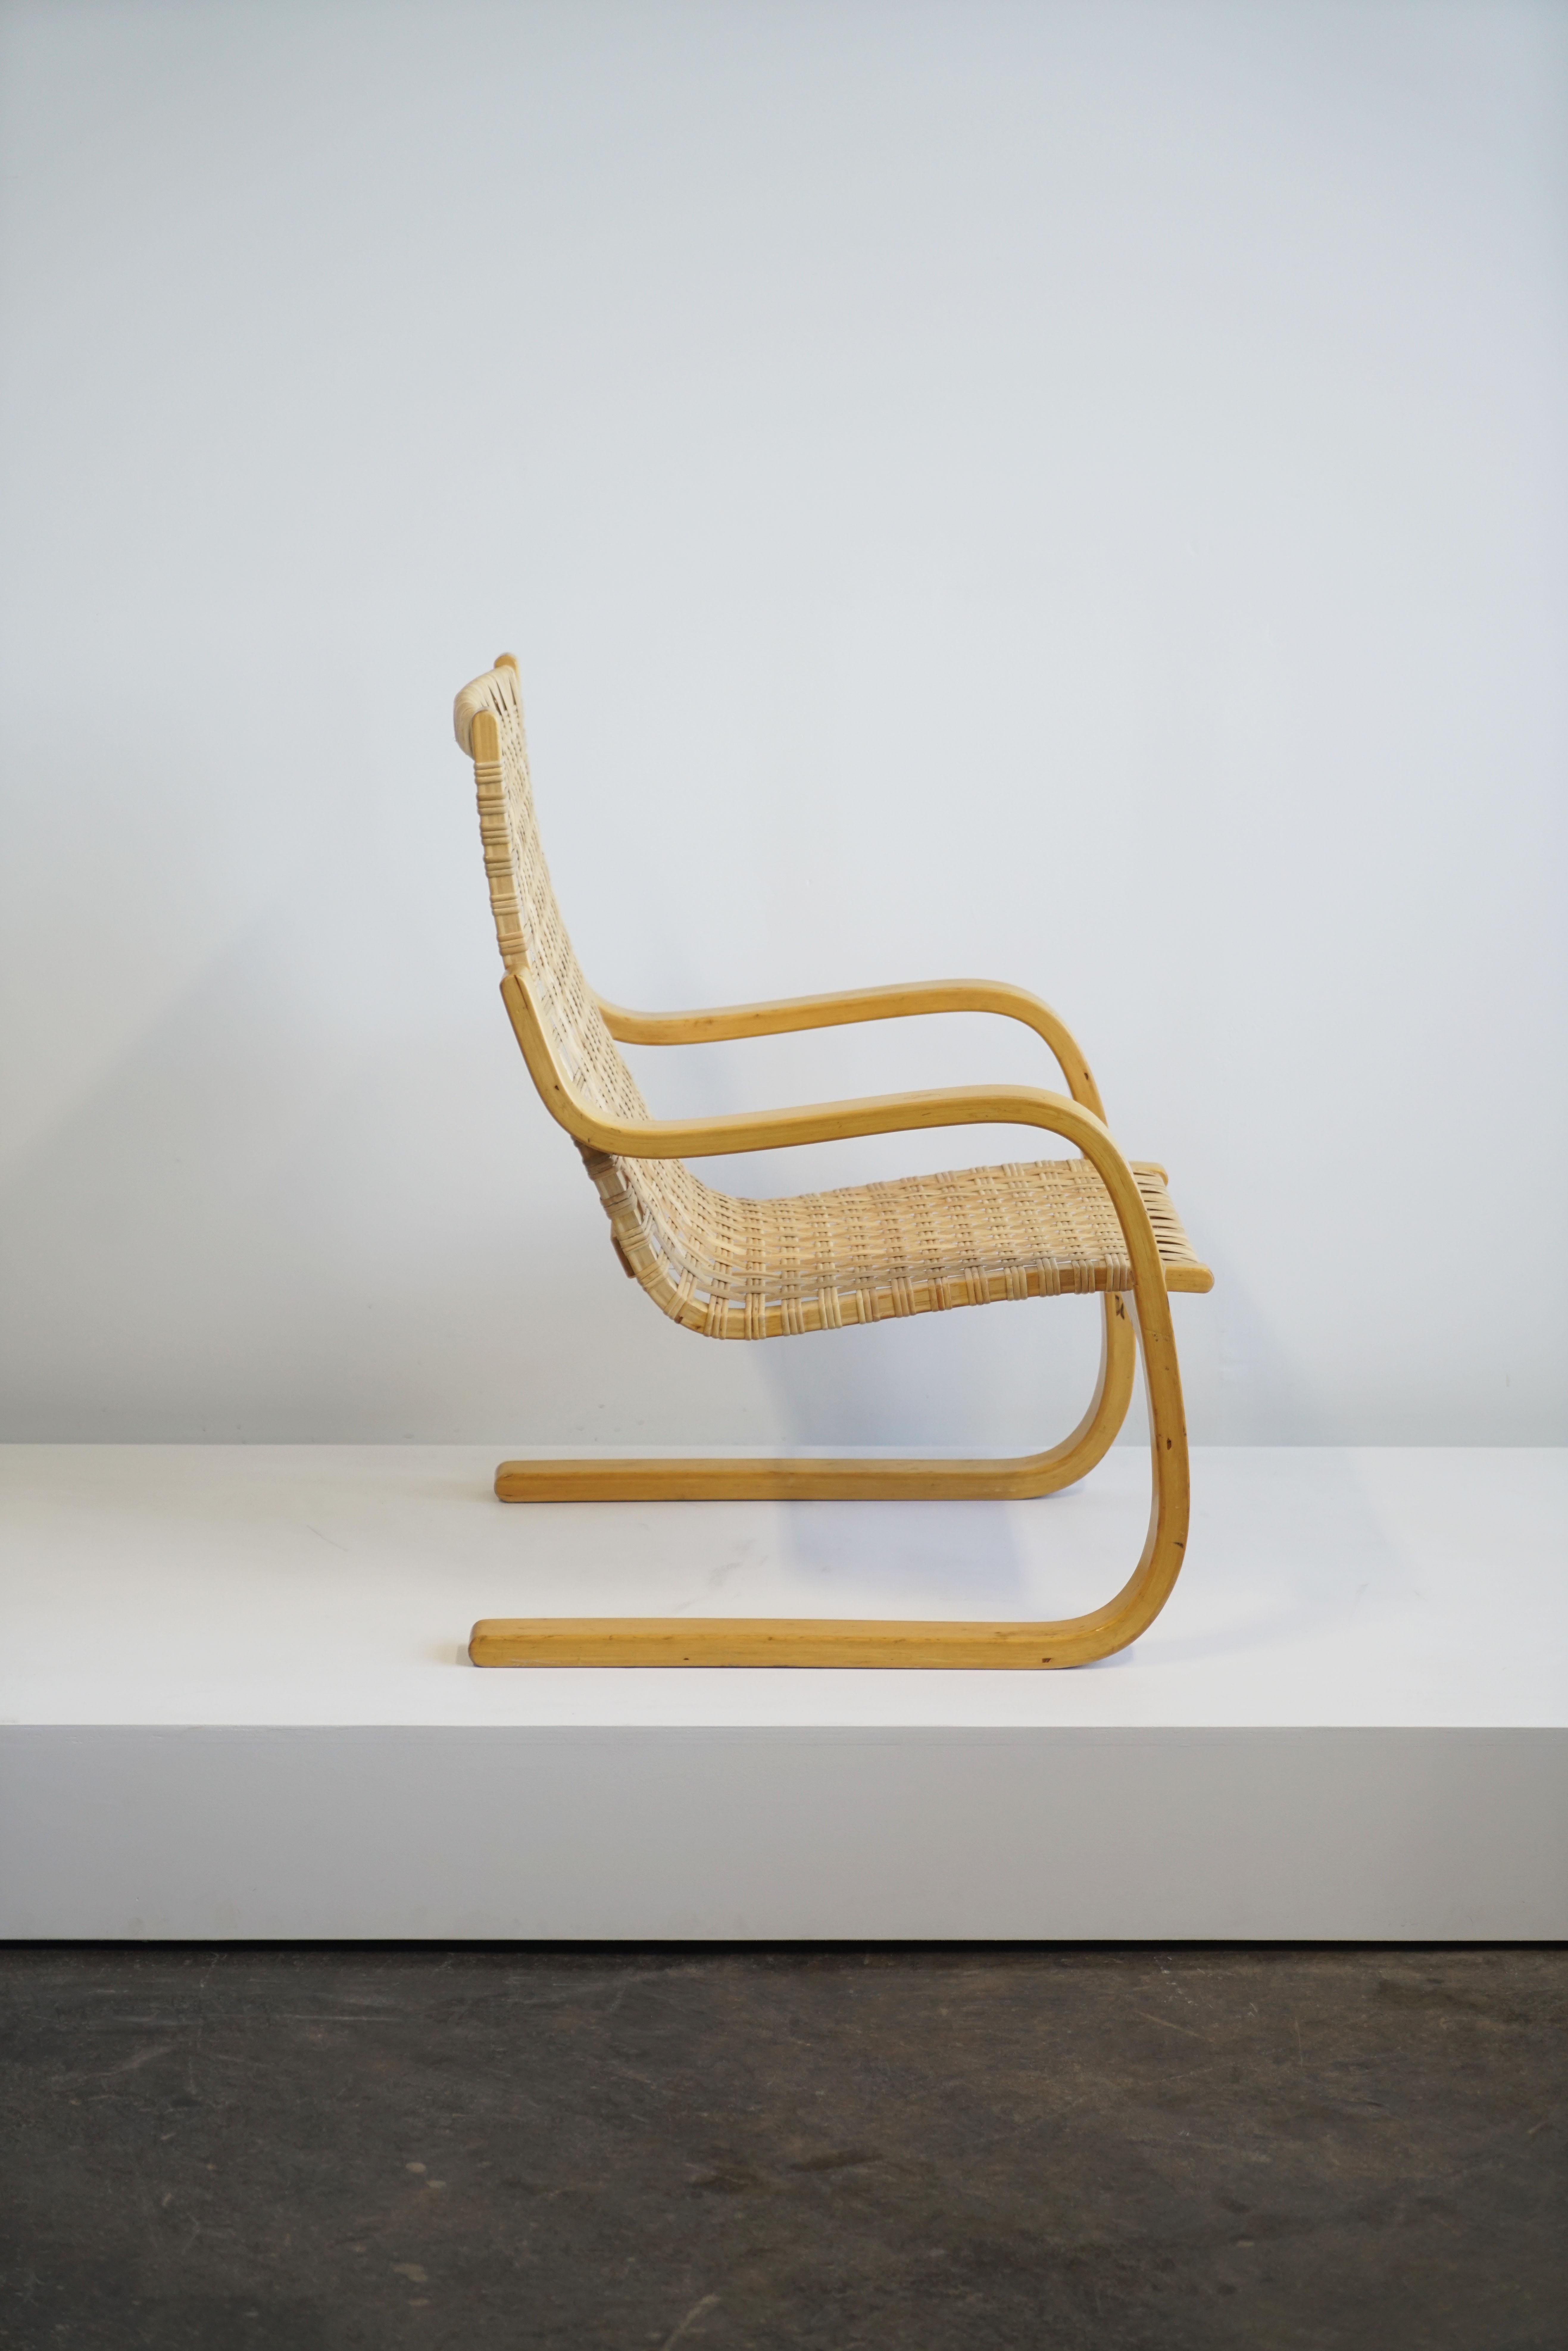 Mid-Century Modern 1960 Alvar Aalto Cantilever Chair Model 406 by Artek in Birch and Cane Webbing For Sale